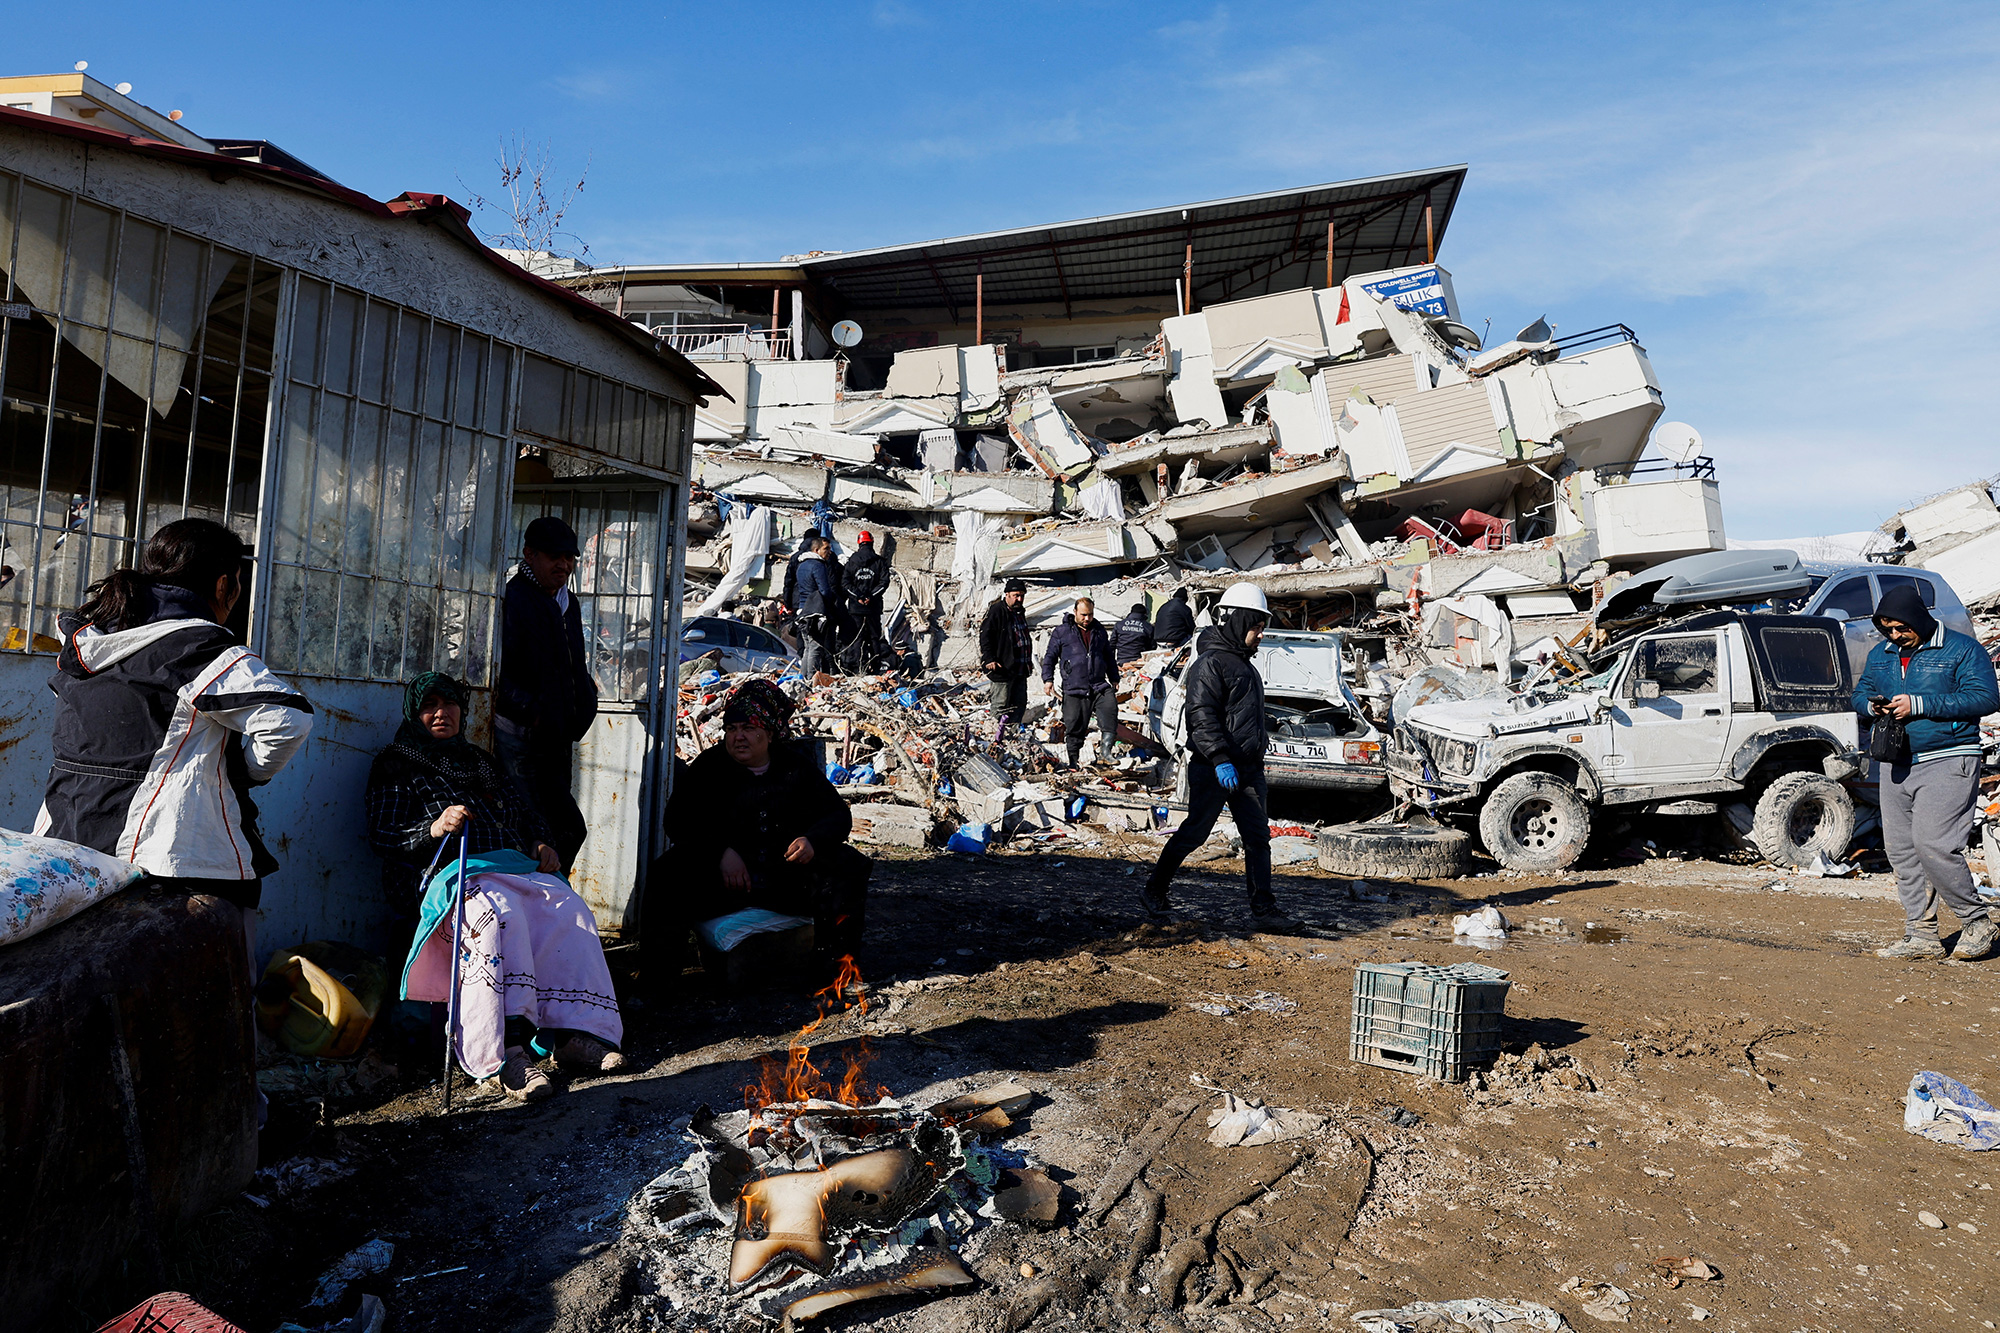 People sit next to a fire near the site of a collapsed building in Kahramanmaras, Turkey, on February 7.